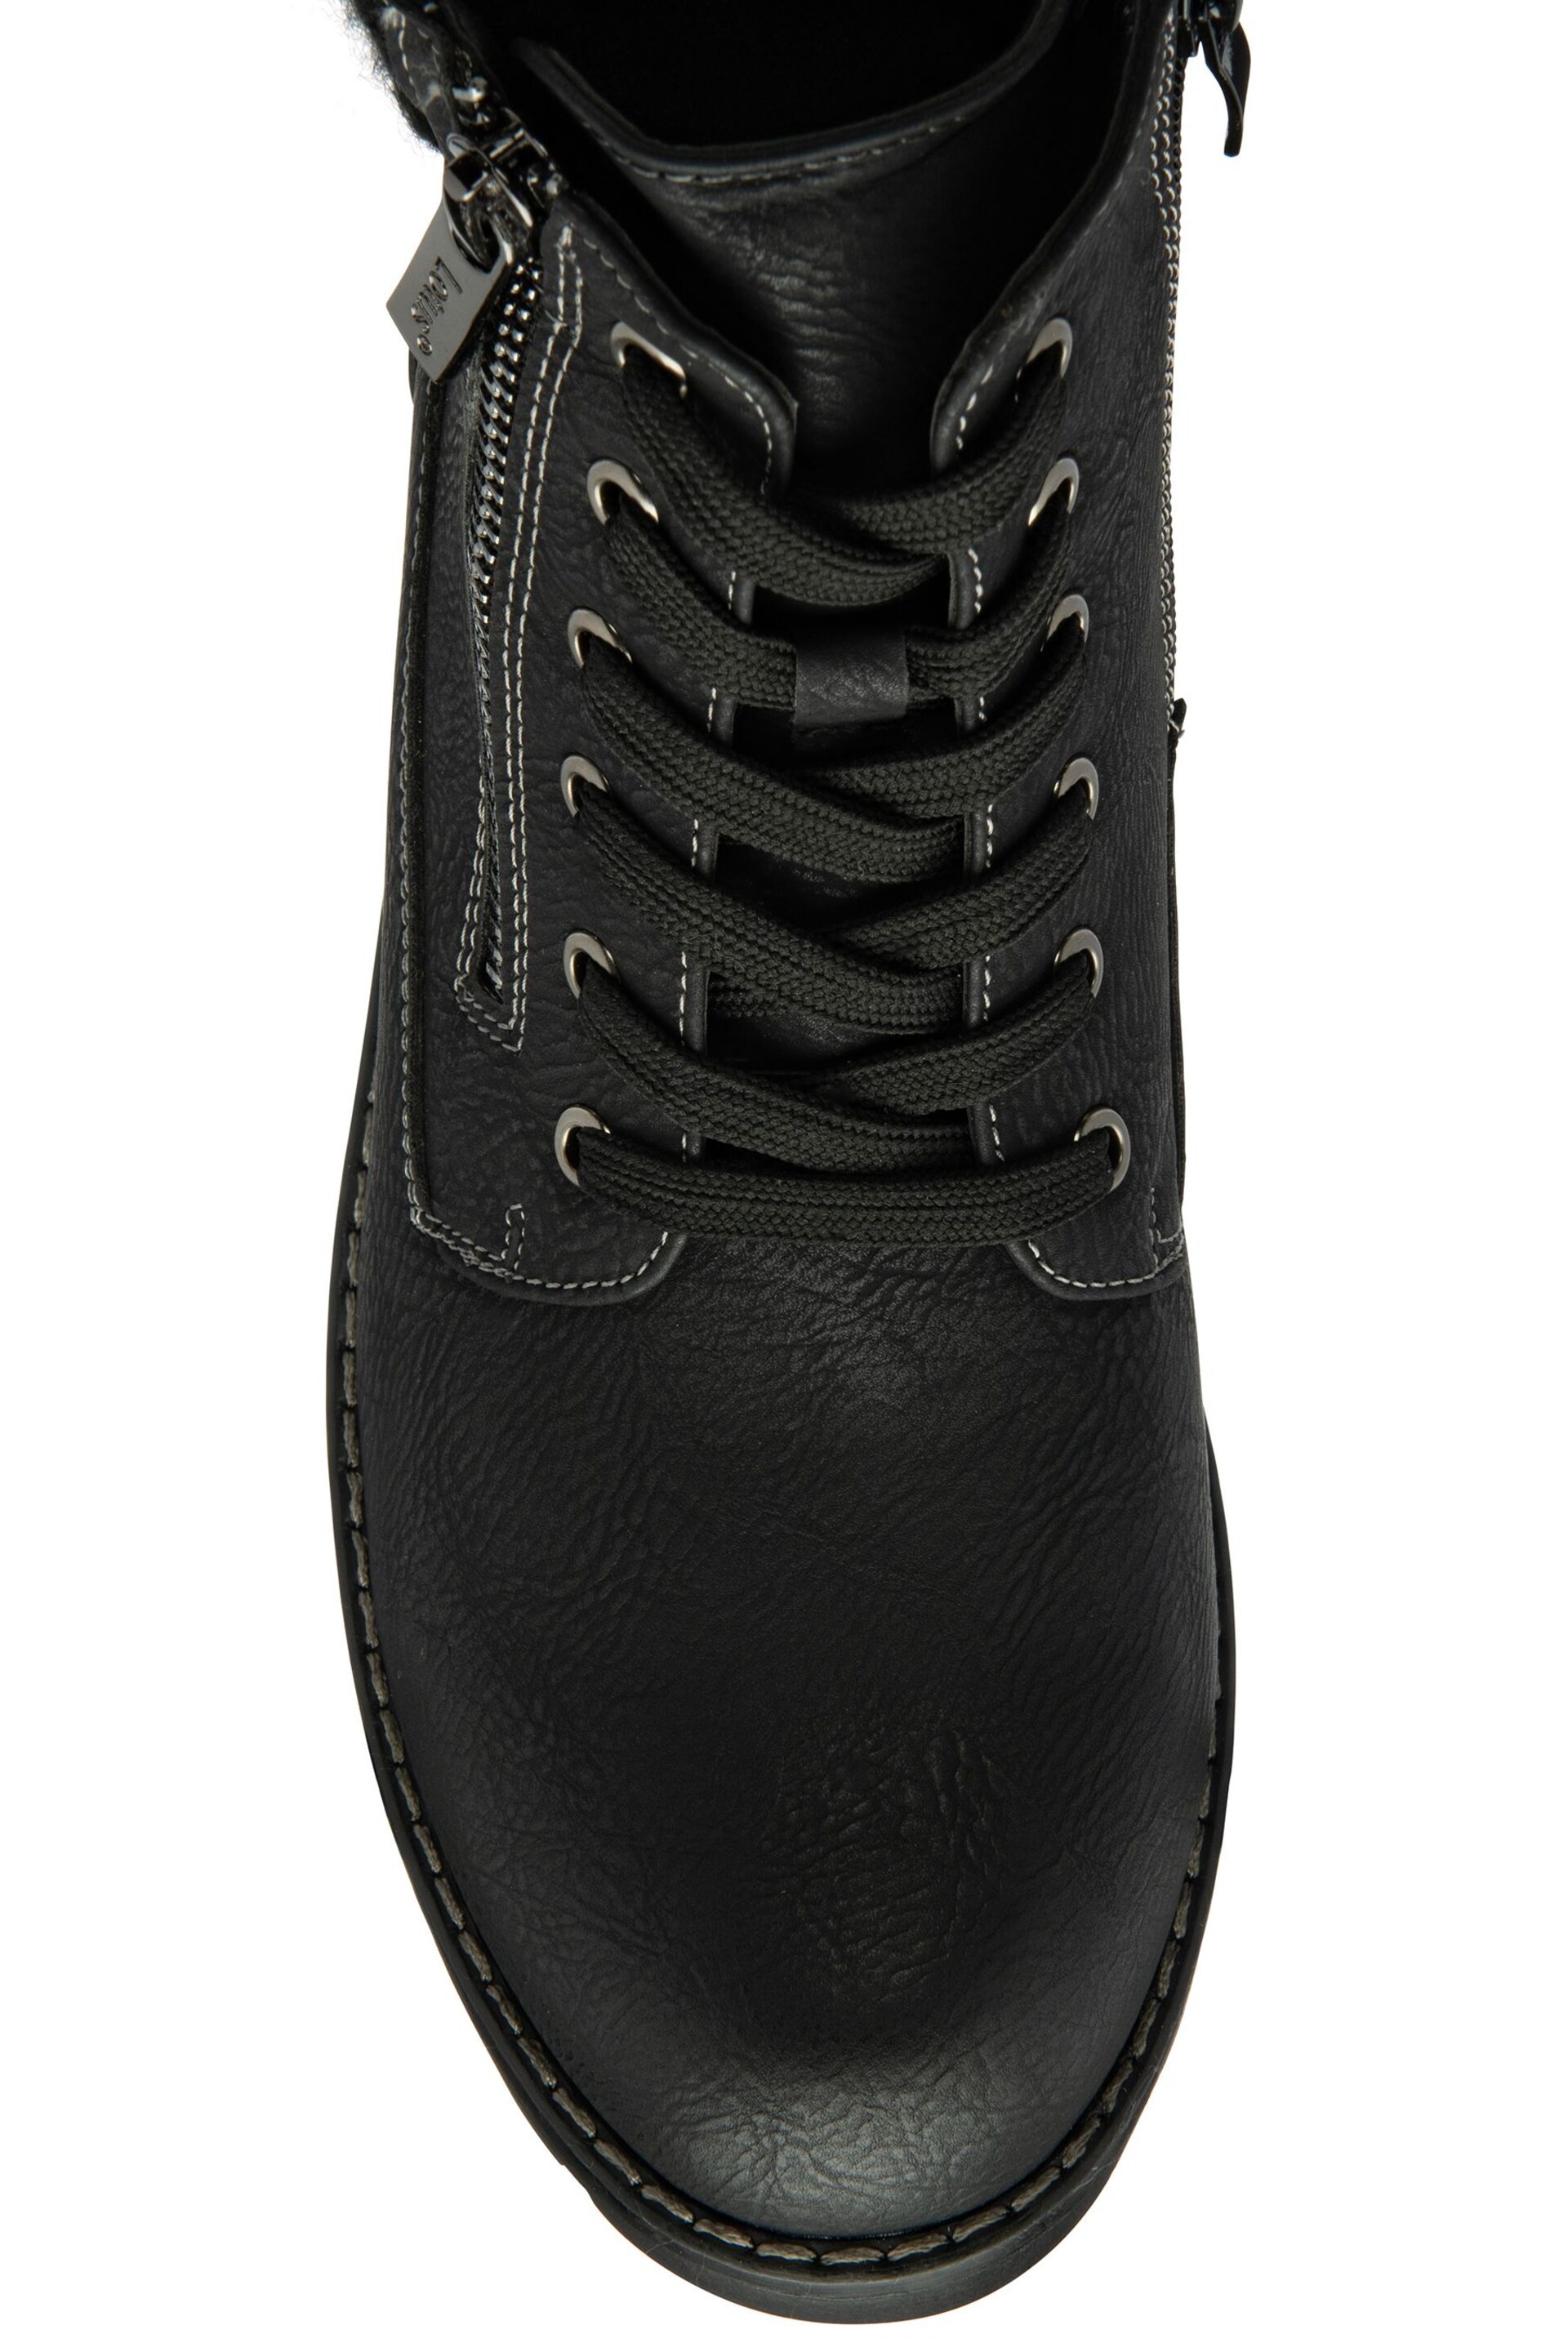 Lotus Jet Black Lace-Up Ankle Boots - Image 4 of 4